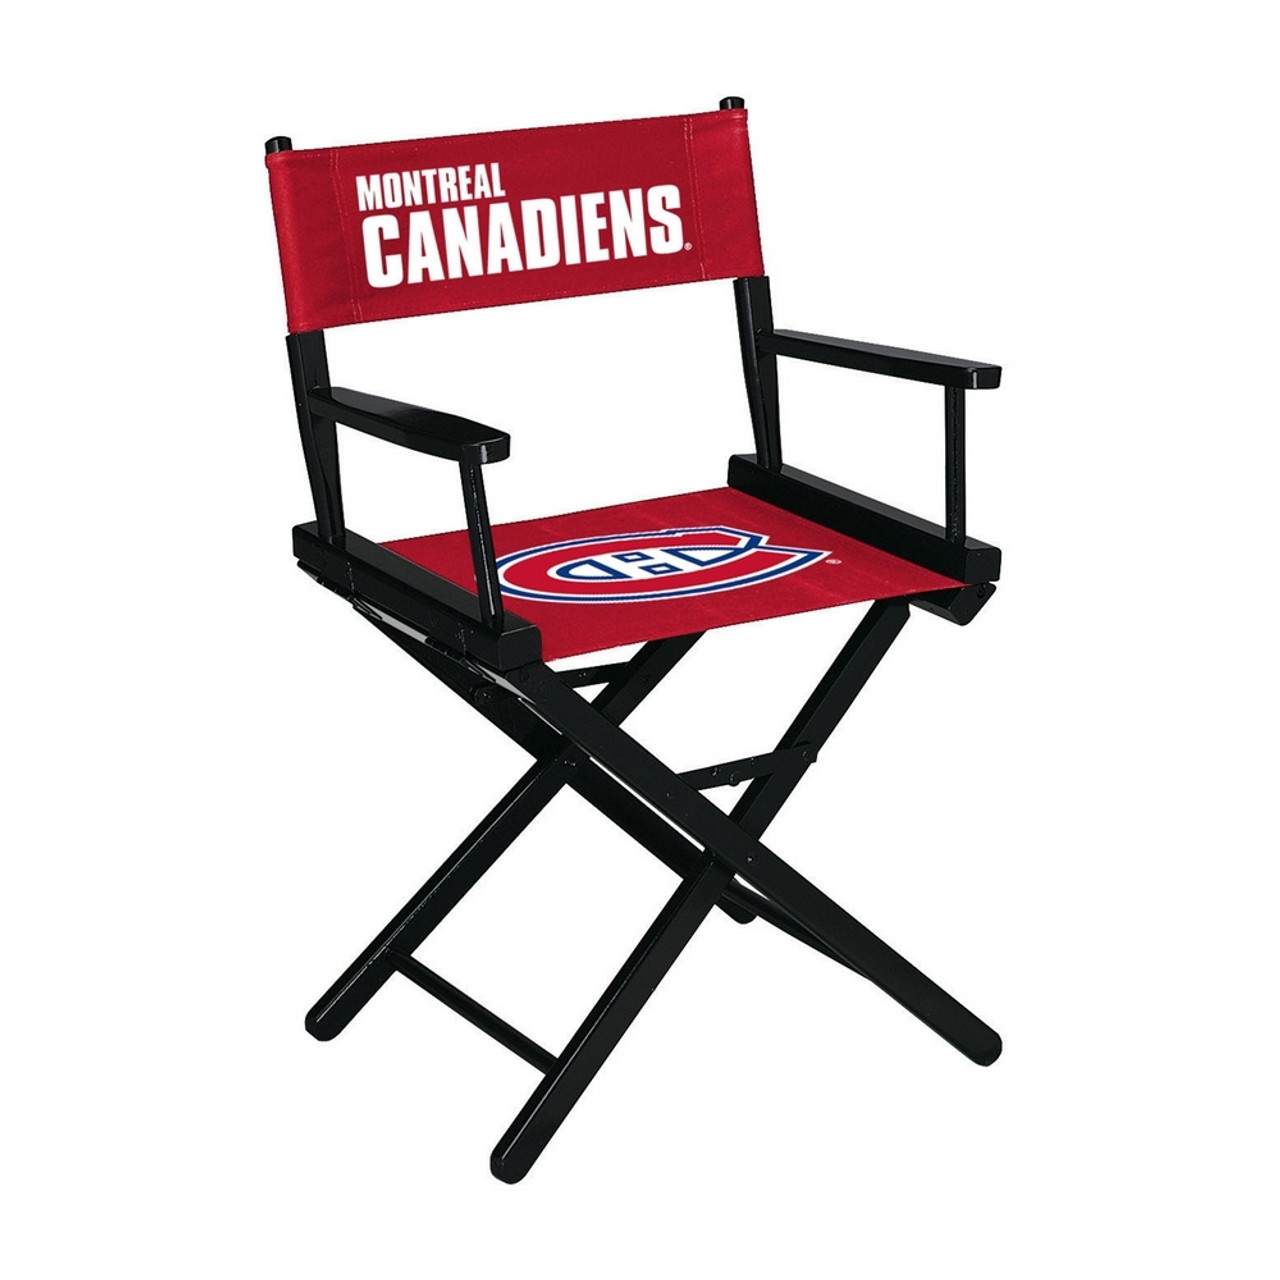 401-4109, Montreal, Canadiens, Table, Height, Directors, Chair, FREE SHIPPING, Canvas, NHL, Imperial